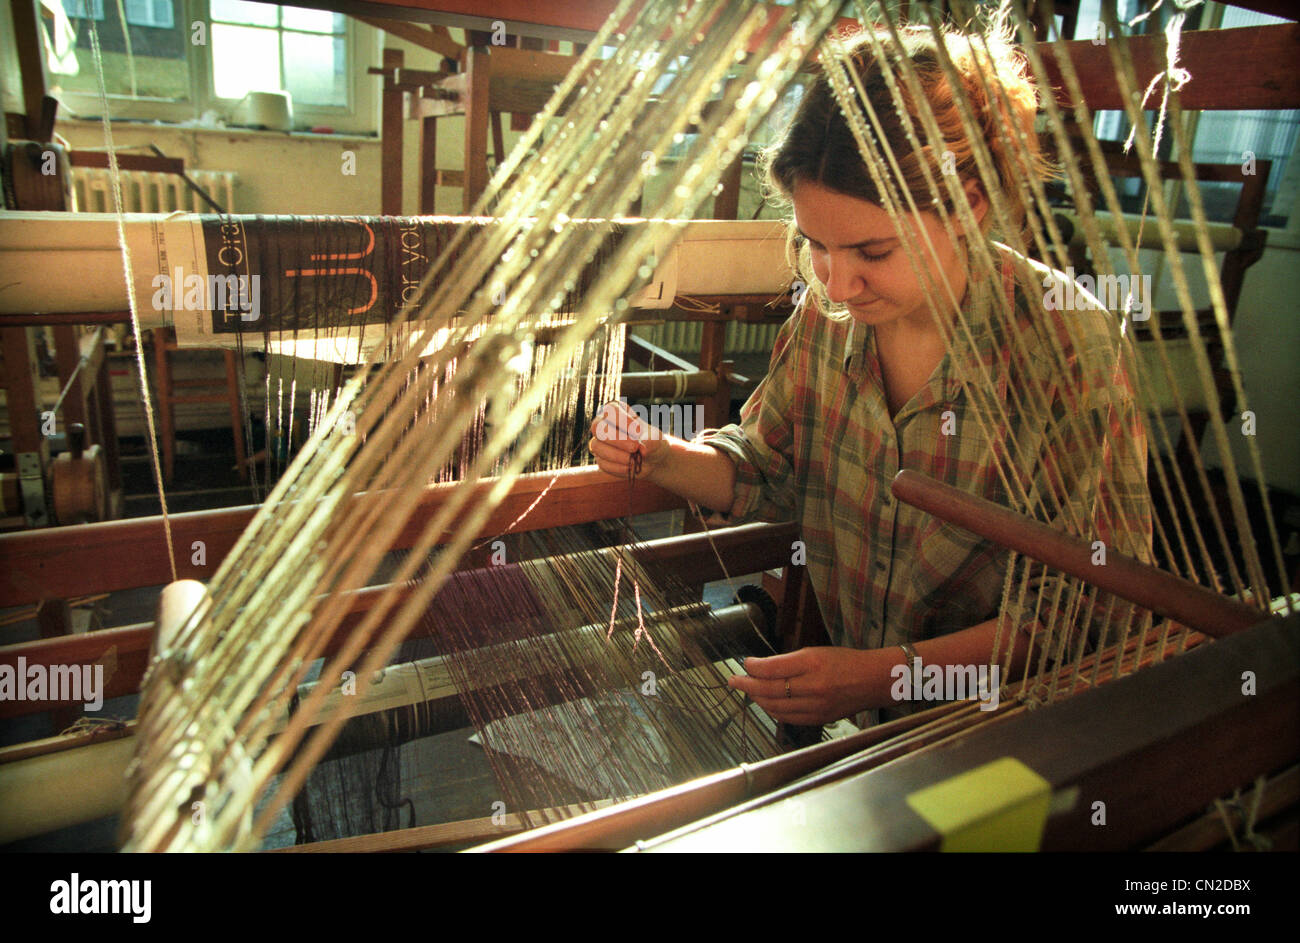 A University of Brighton textile student inspects the wool threads on a loom as part of her degree course. Stock Photo